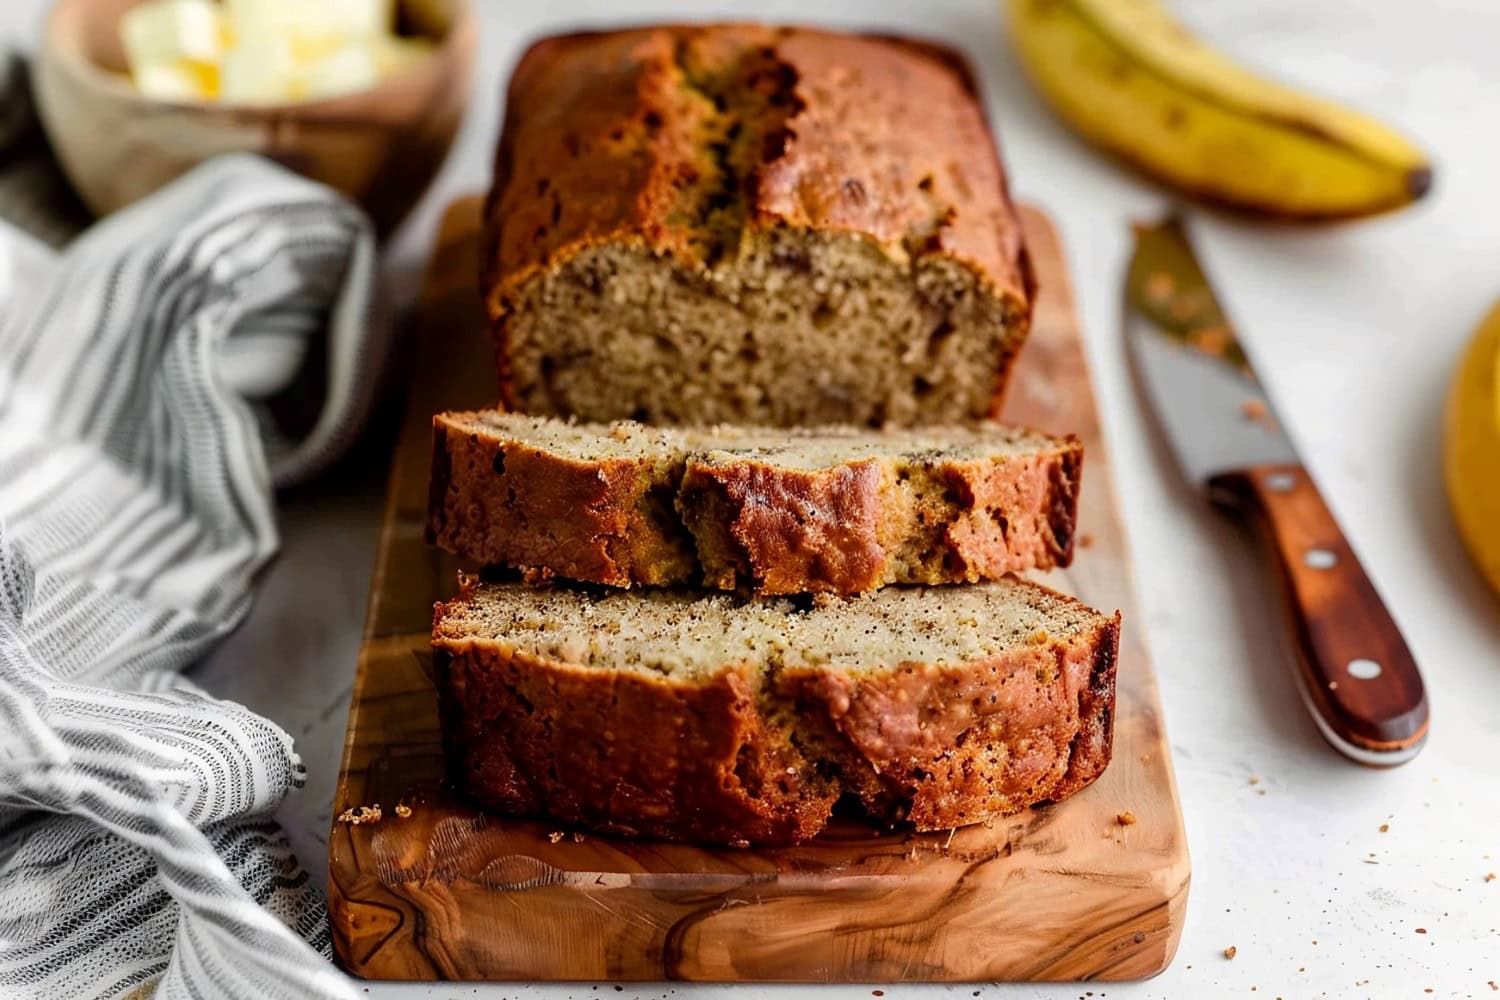 Front View of Bisquick Banana Bread Loaf with Two Slices Cut on a Wood Cutting Board with a Banana, Knife, and Kitchen Towel in the Background